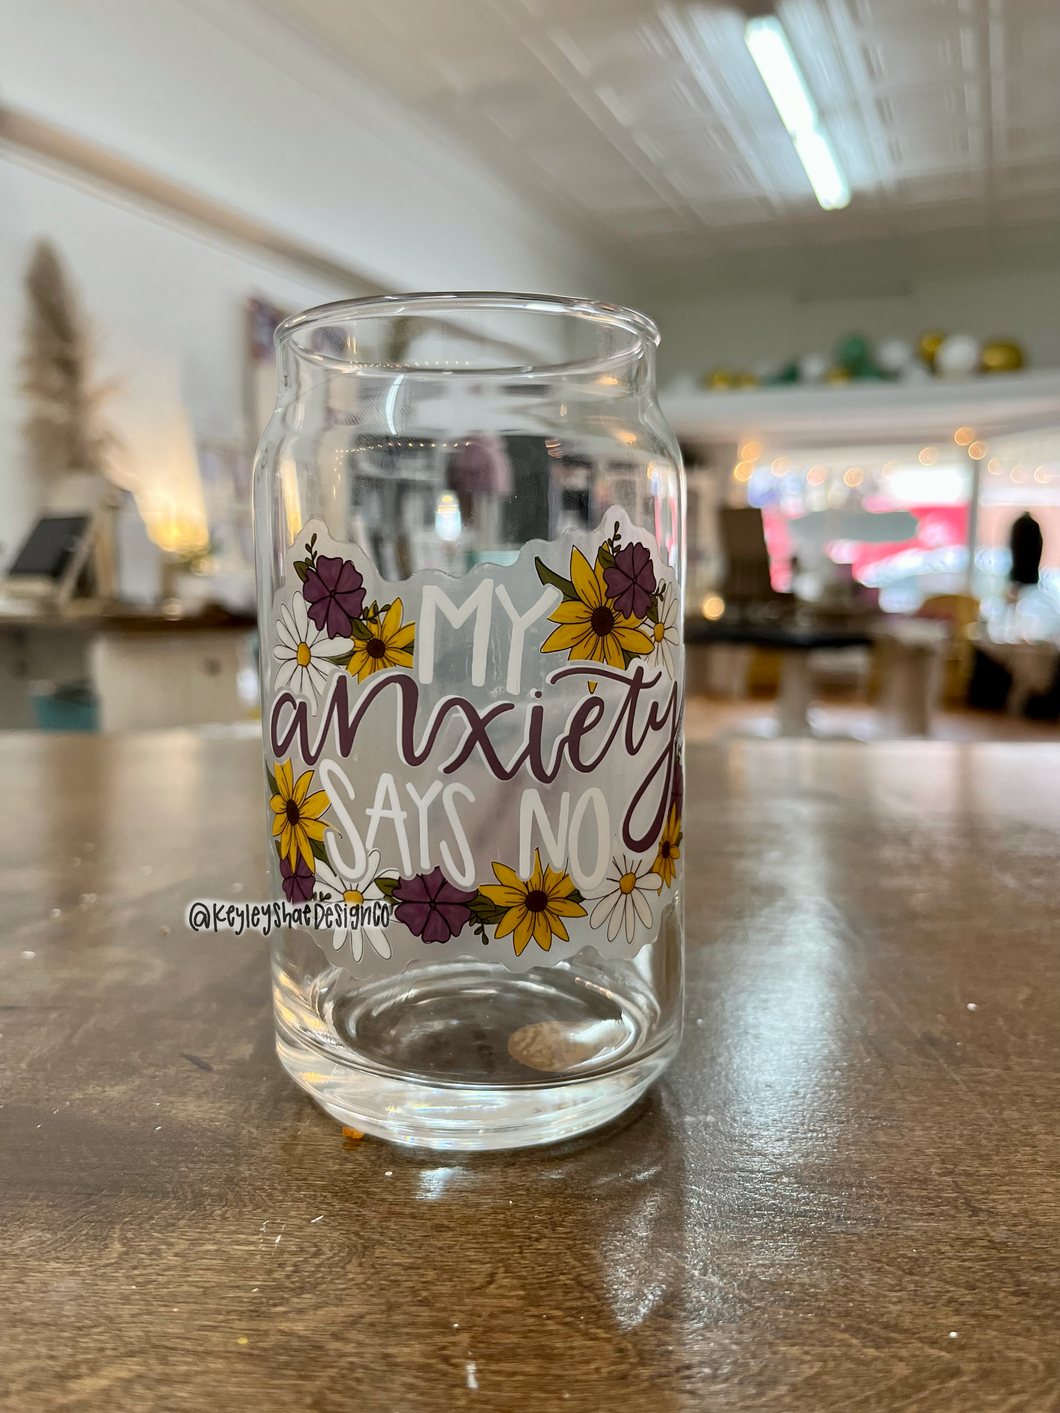 My Anxiety Says No Glass Cup